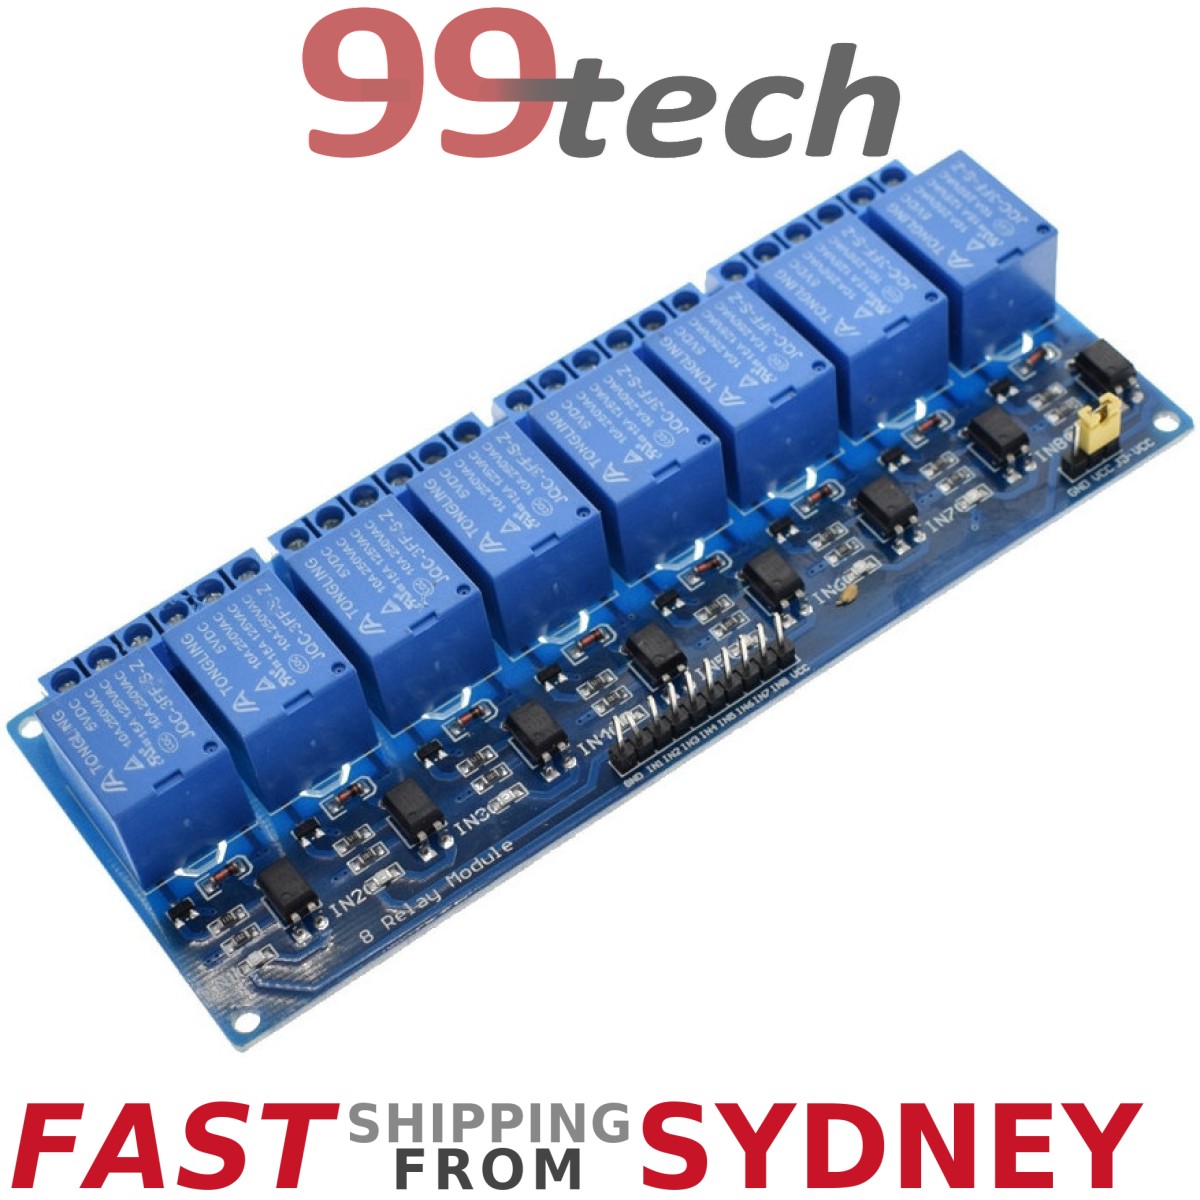 Relay Module, 8 Channels, LEDs, 5V 10A Opto Isolated, Arduino, from Sydney